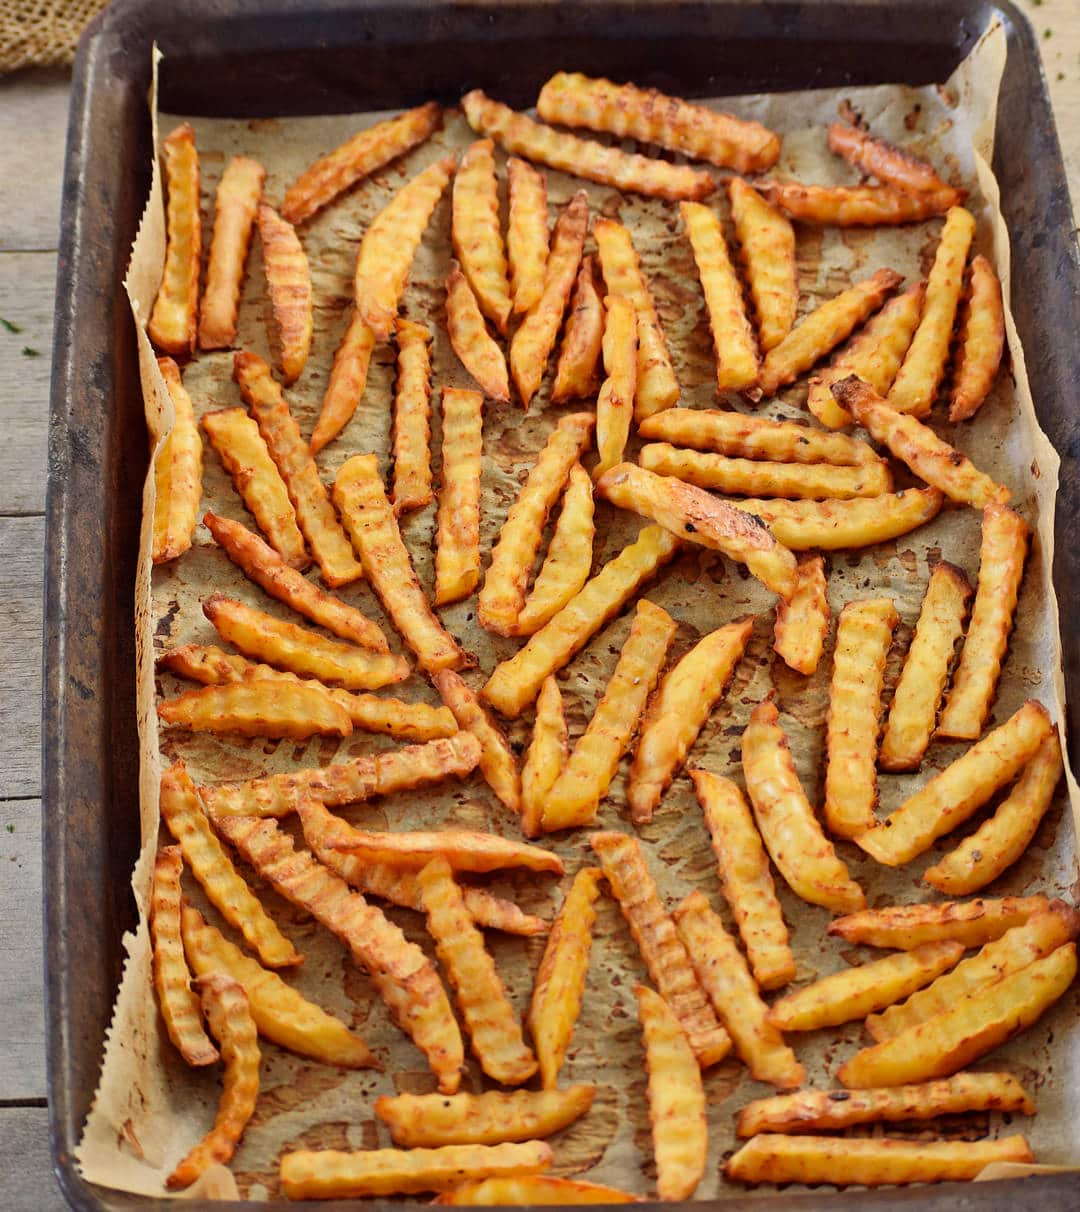 Oven Baked Crinkle Cut Fries for vegan chili cheese fries